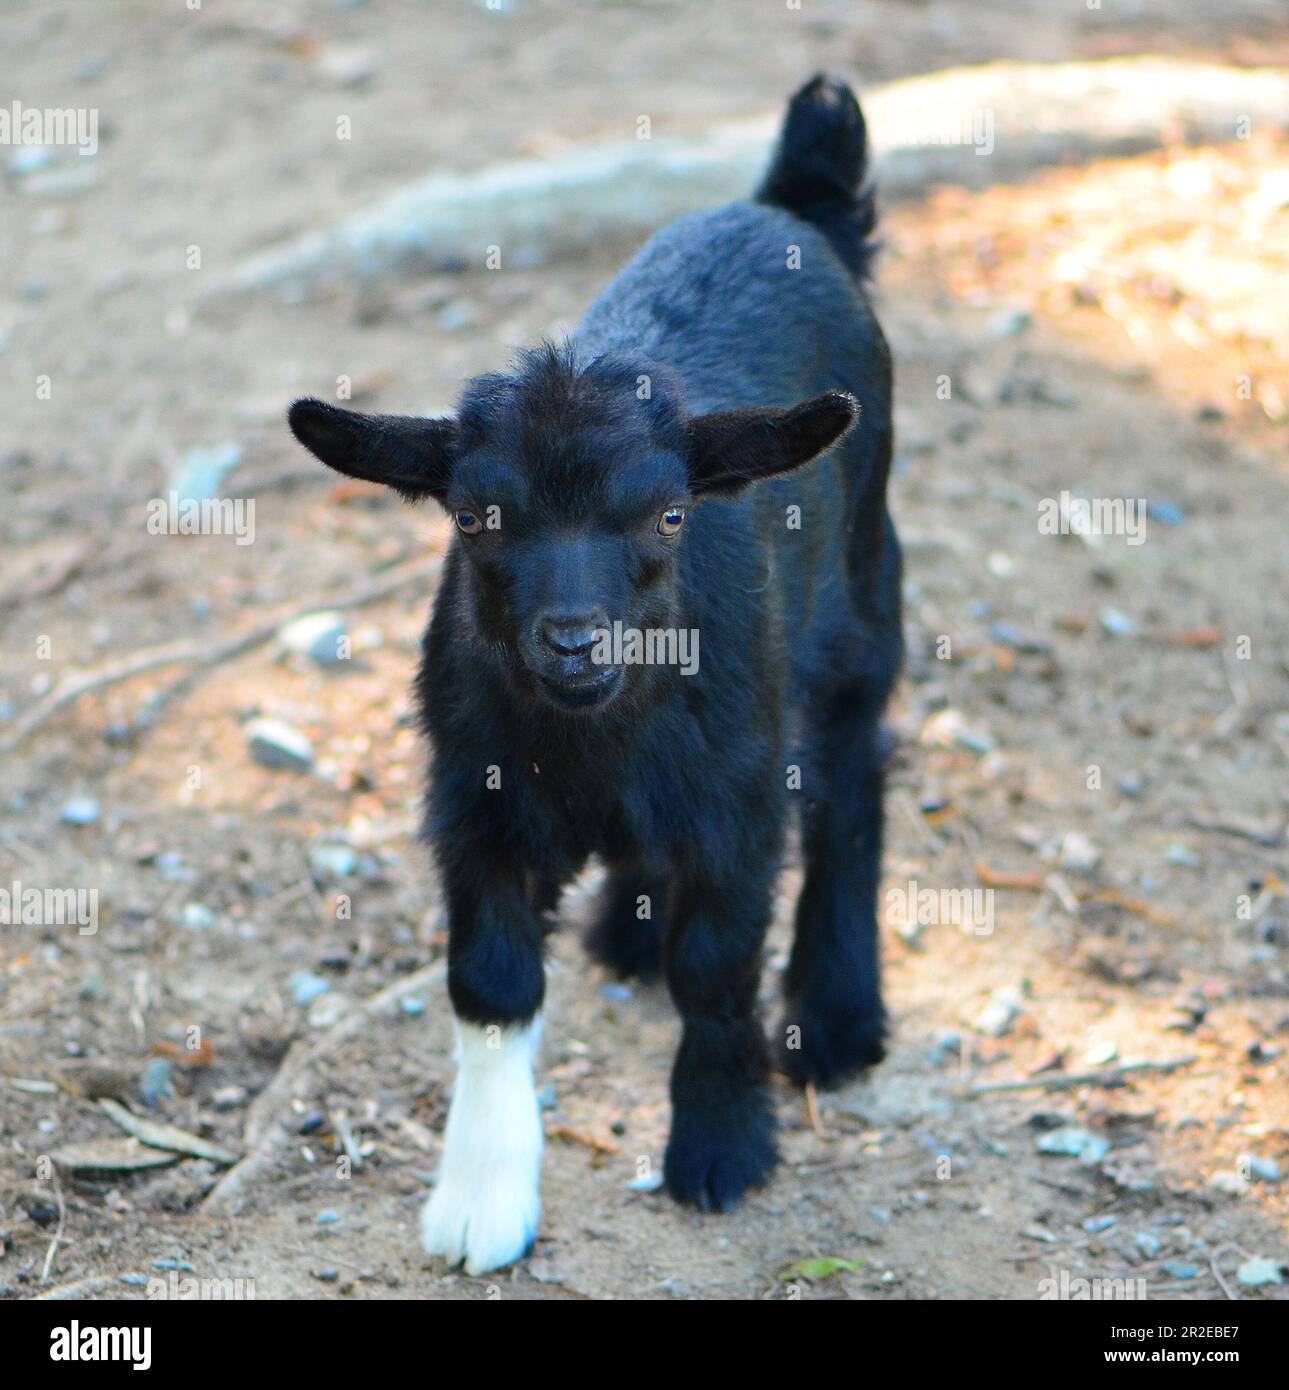 Baby Tennessee Fainting Goat (Capra aegagrus hircus) all black except for a white front foot. Stock Photo